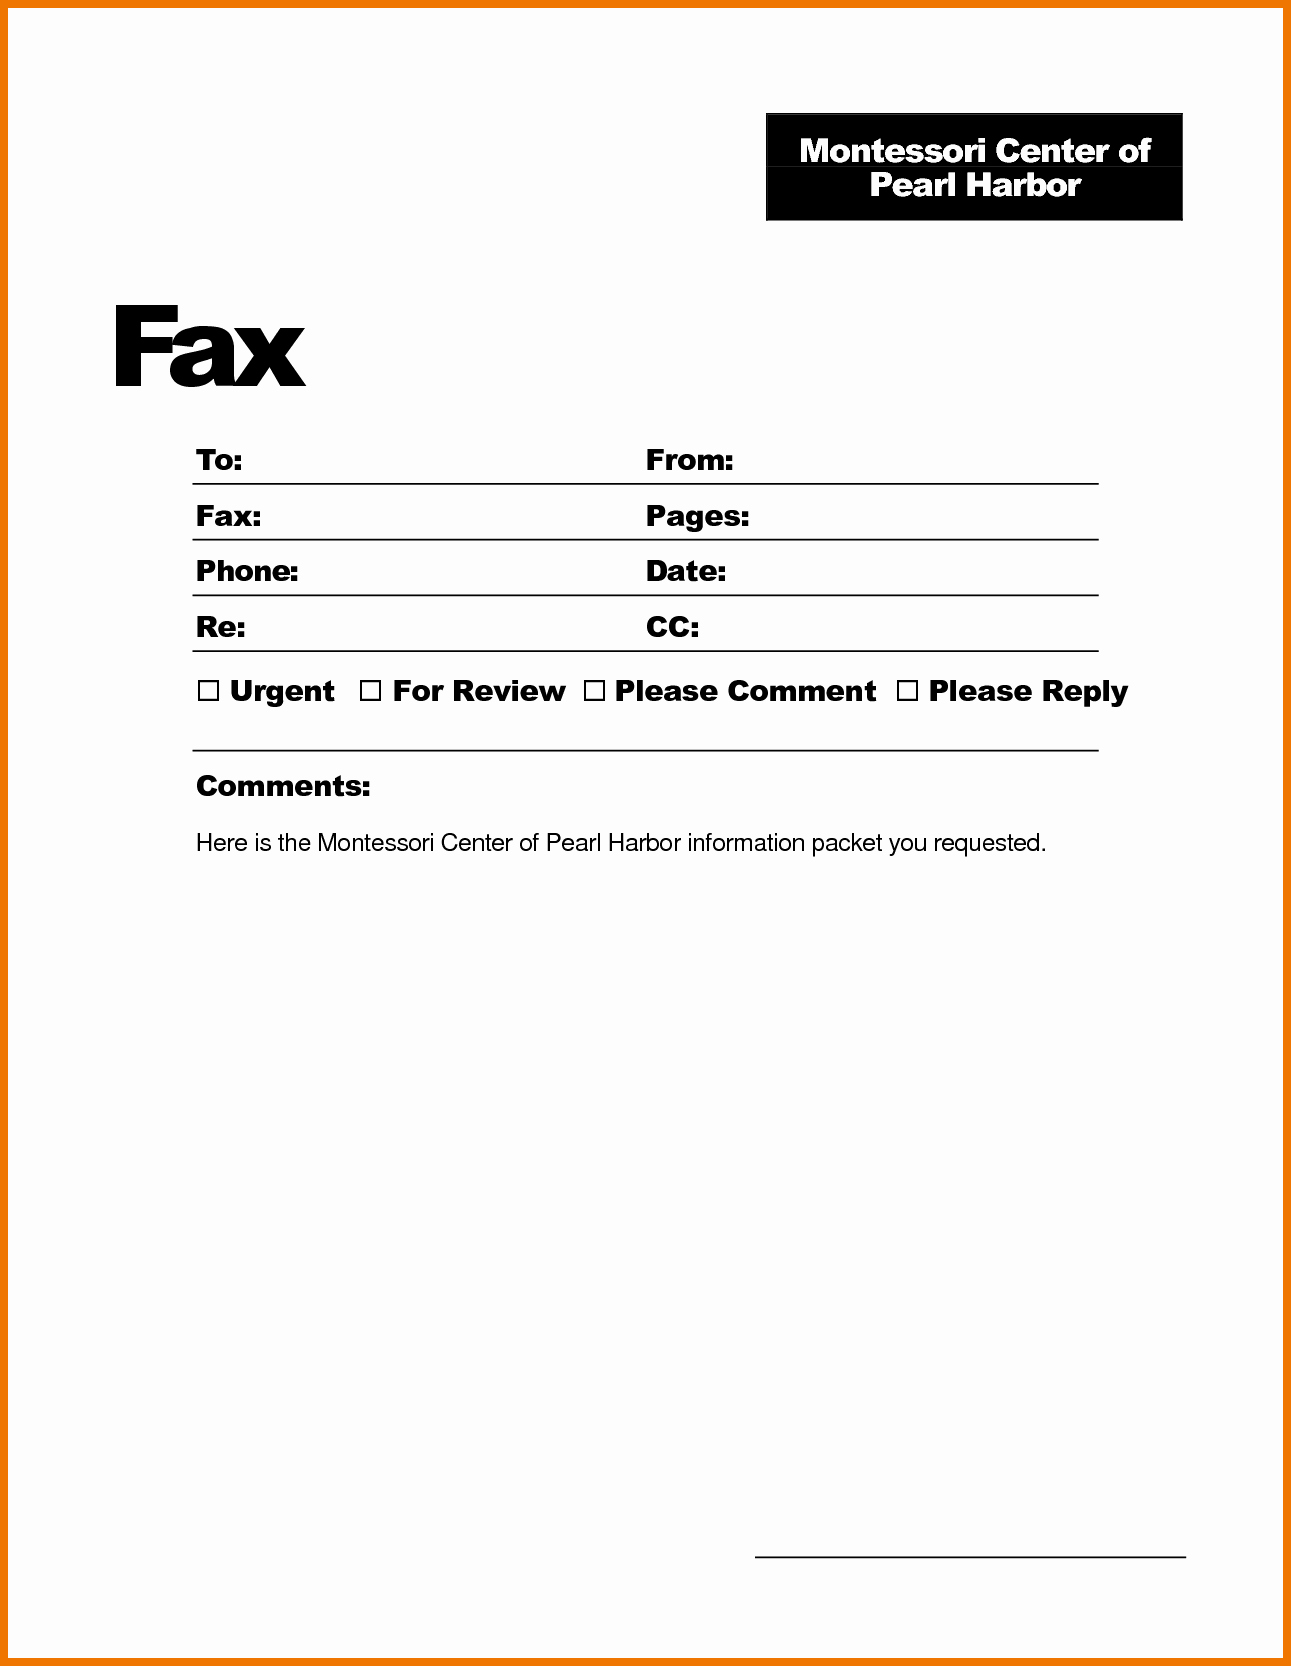 Free Fax Cover Sheets Templates Lovely Microsoft Fice Fax Template Portablegasgrillweber